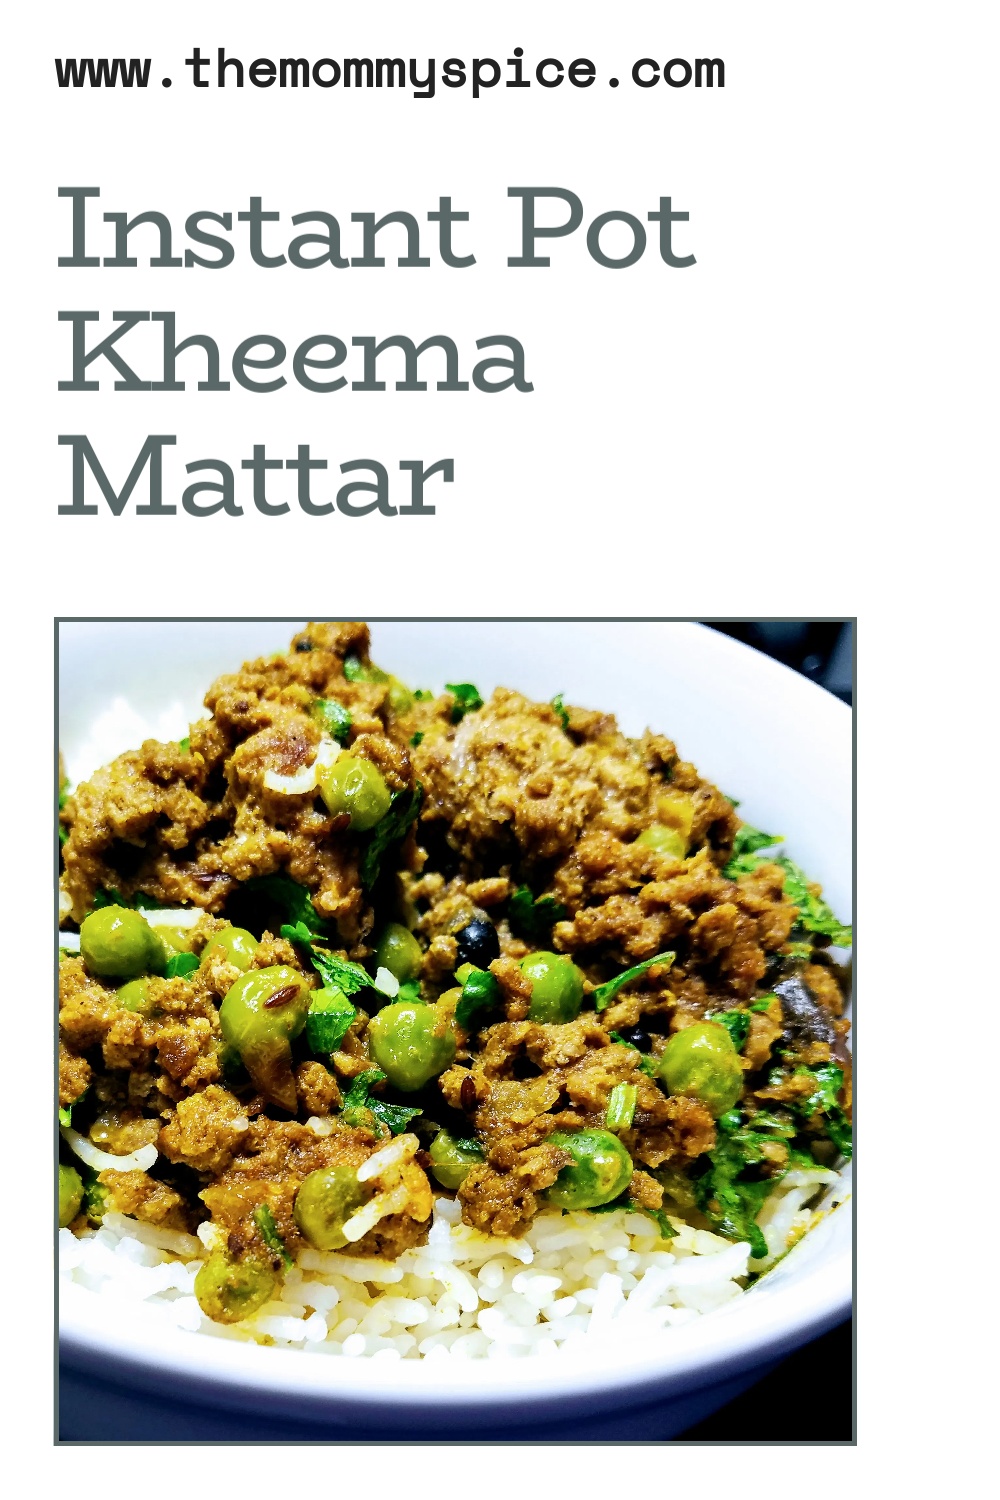 Instant Pot Kheema - Indian Spiced Ground Meat